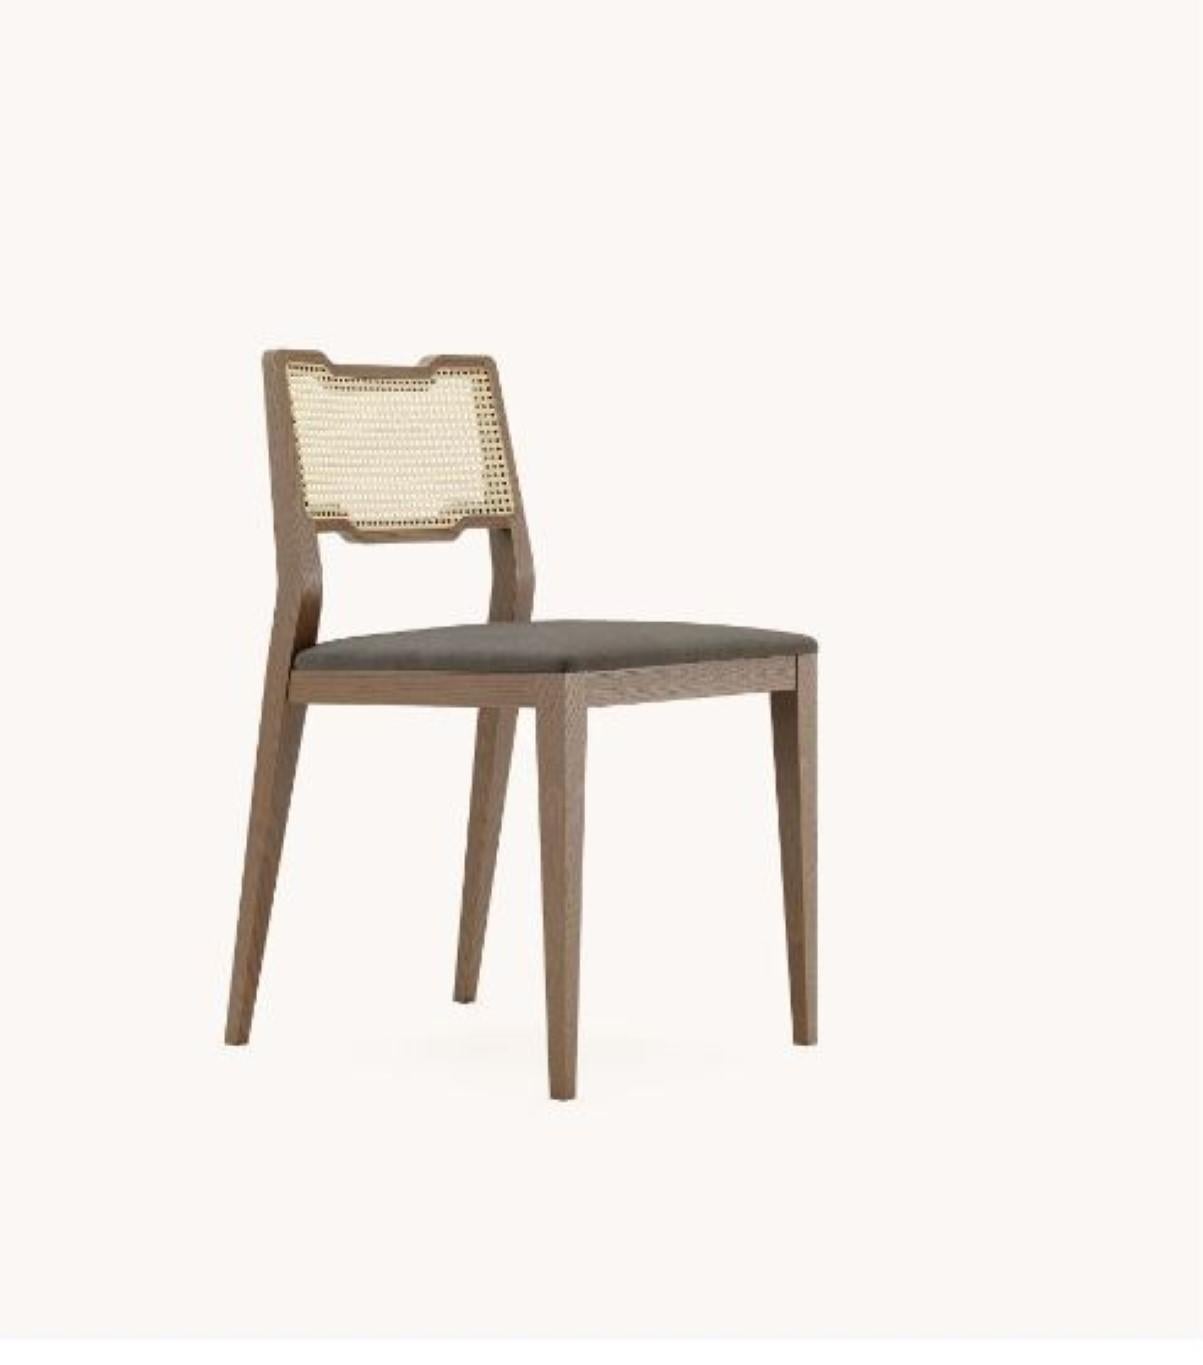 Eva chair by Domkapa
Materials: Walnut Stained Ash, Velvet.
Dimensions: W 46 x D 53 x H 81 cm.
Also available in different materials. 

The epitome of comfort, the best description of Vianna chair. Supported by four wooden legs, the padded seat